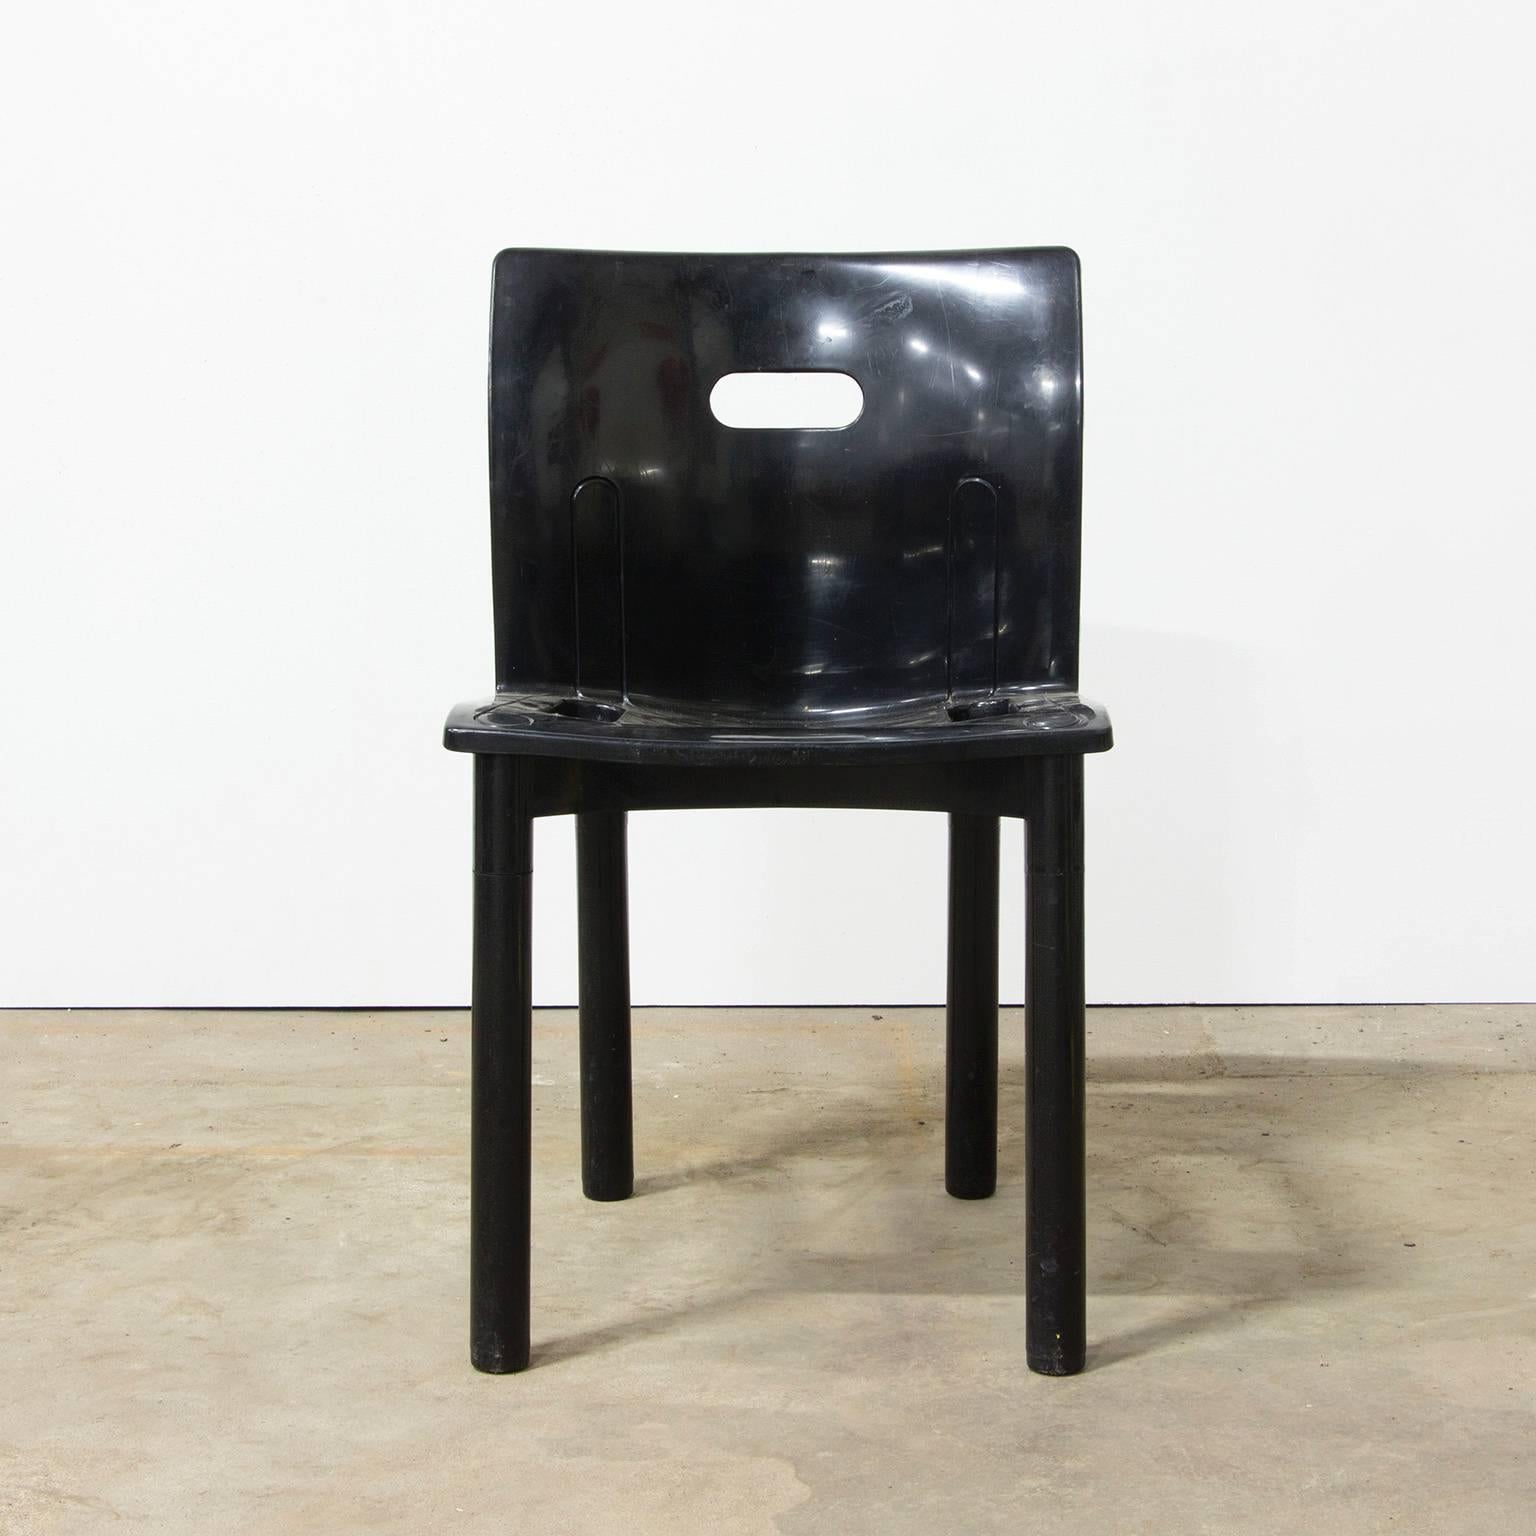 Late 20th Century 1986, Anna Castelli Ferrieri, Plastic Stacking Chairs 4870 for Kartell in Black